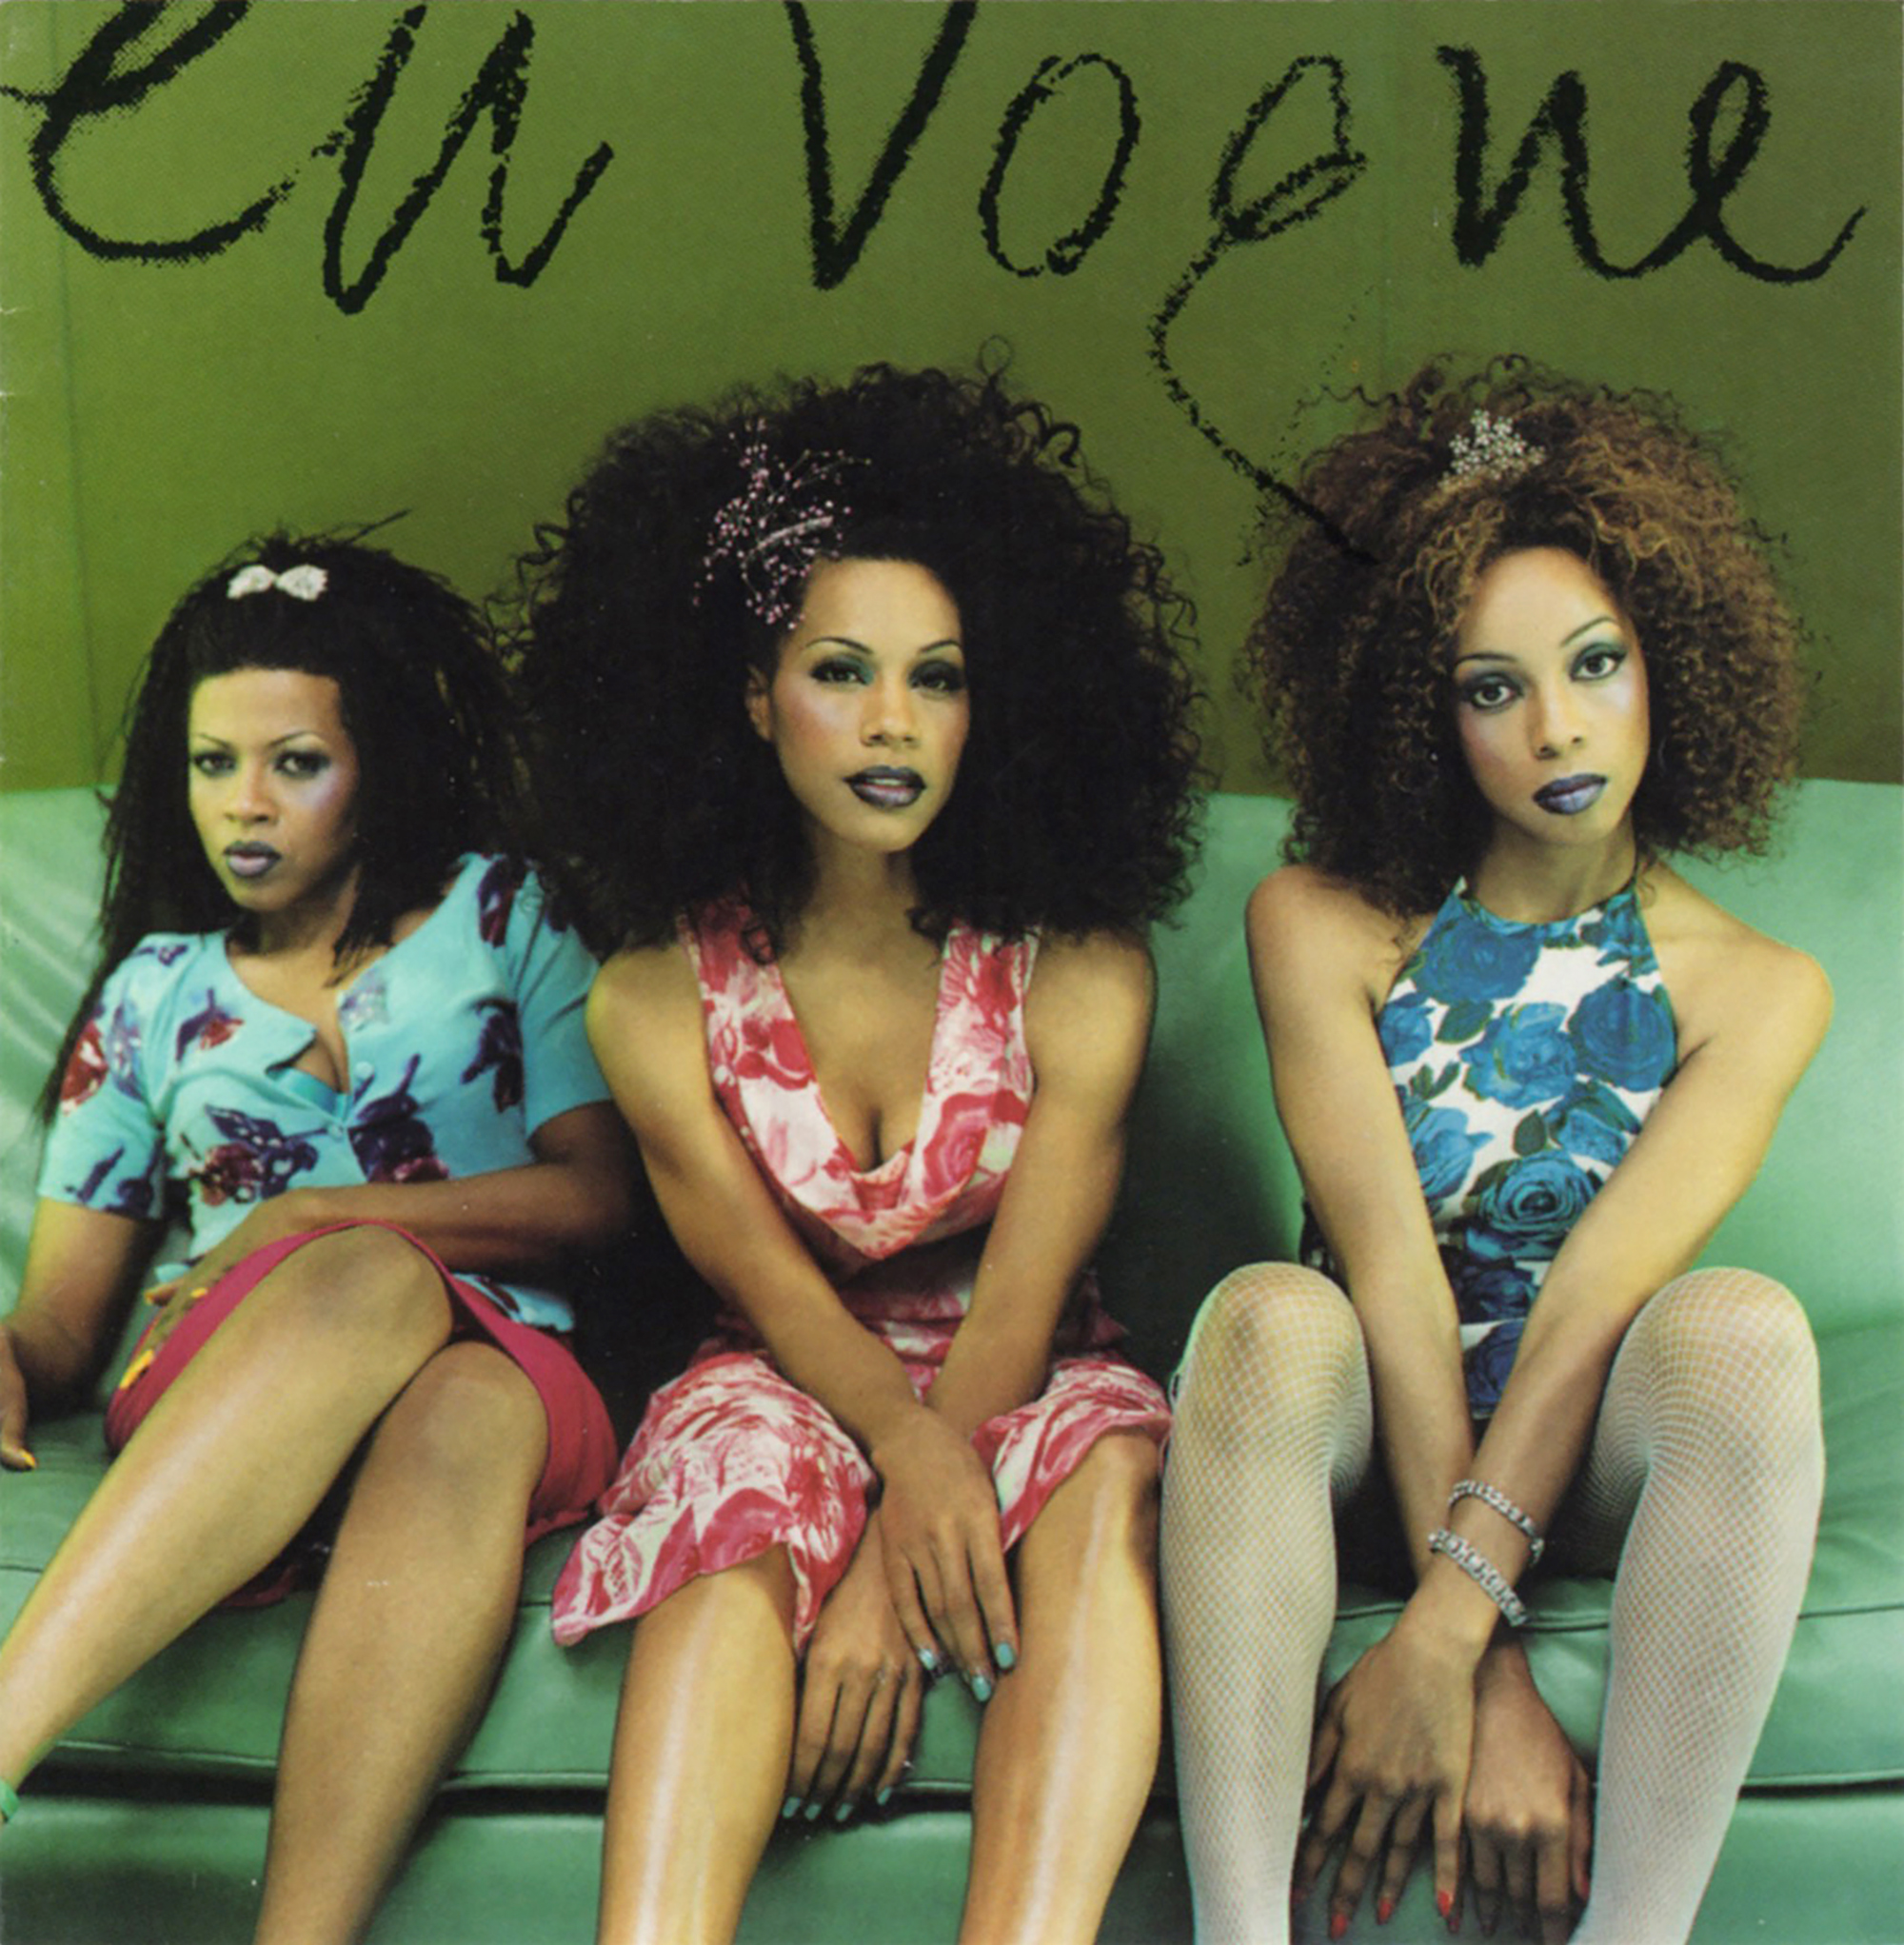 the 90s R&B band en vogue photographed for their EV3 campaign